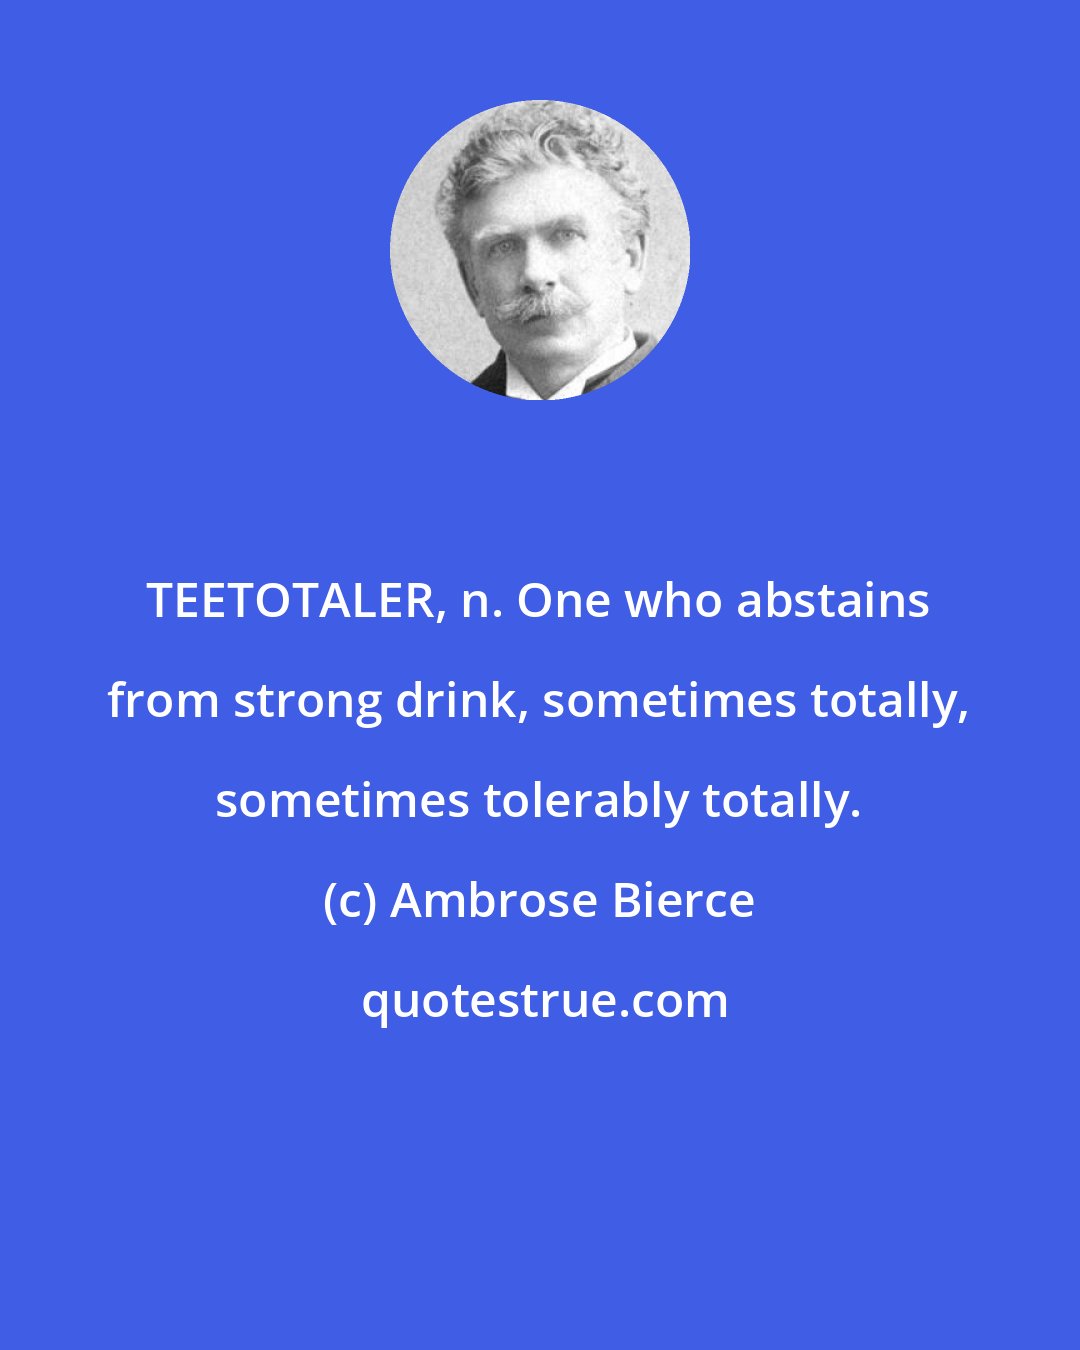 Ambrose Bierce: TEETOTALER, n. One who abstains from strong drink, sometimes totally, sometimes tolerably totally.